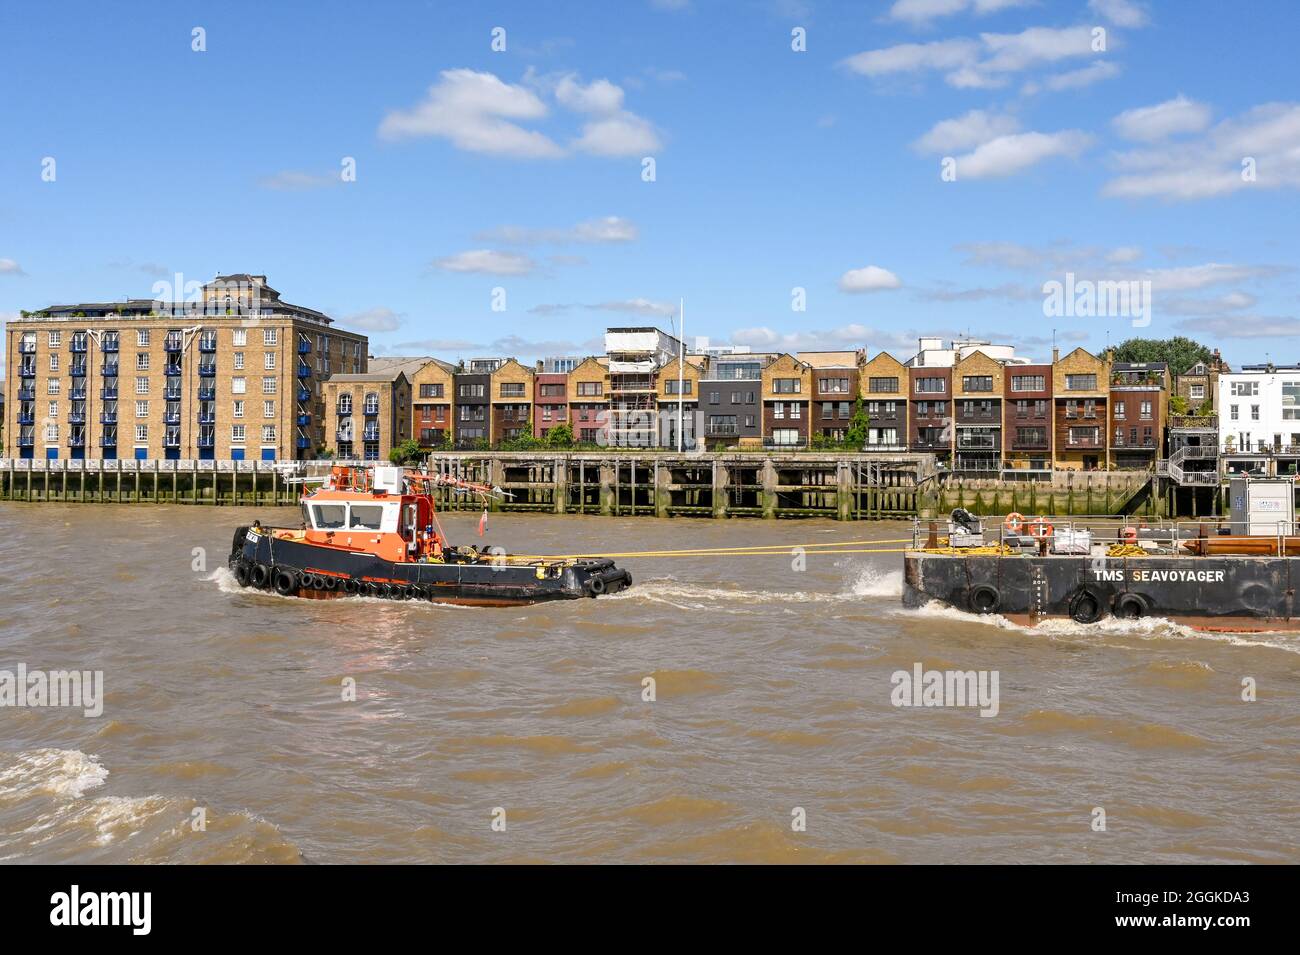 London, England - August 2021: Industrial tugboat towing a barge on the River Thames Stock Photo